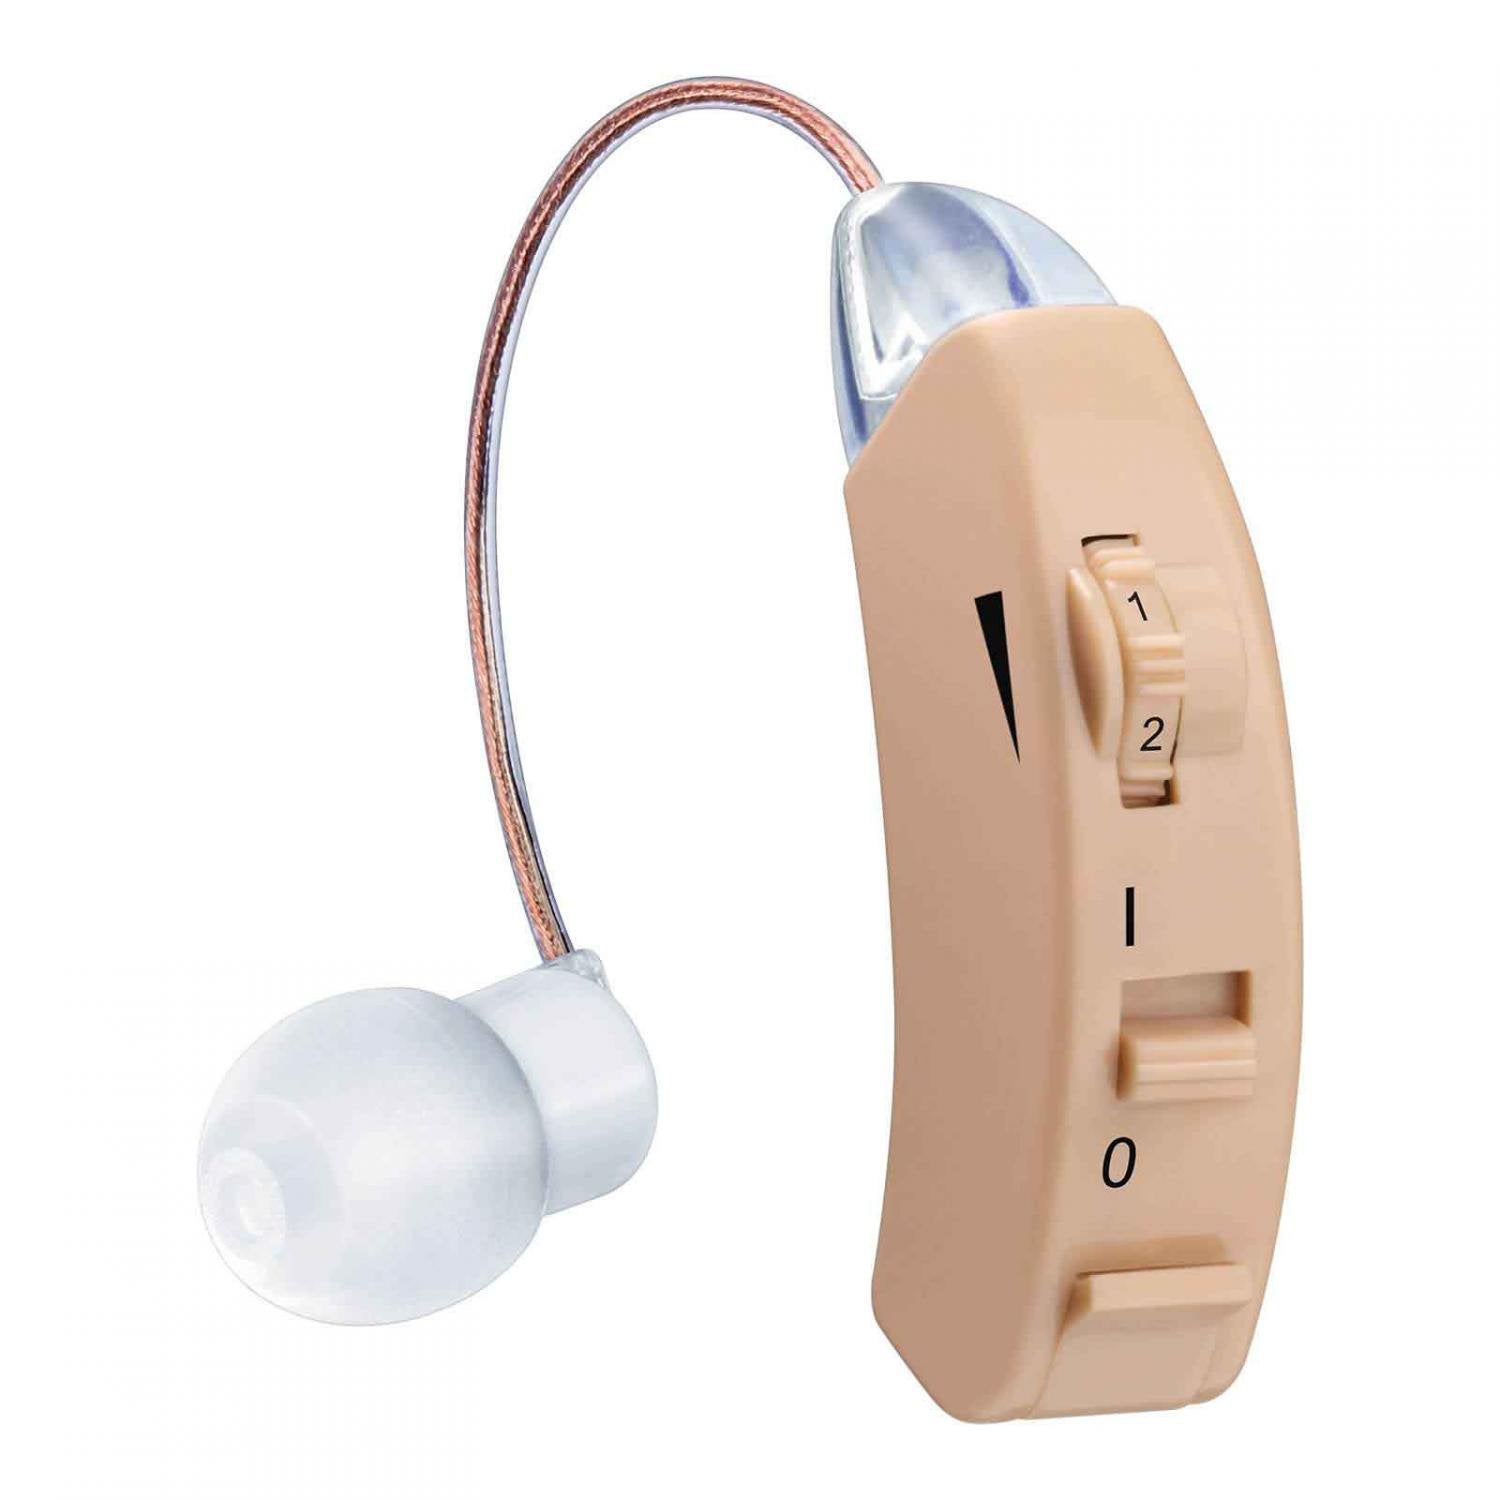 I bought a cheap hearing aid